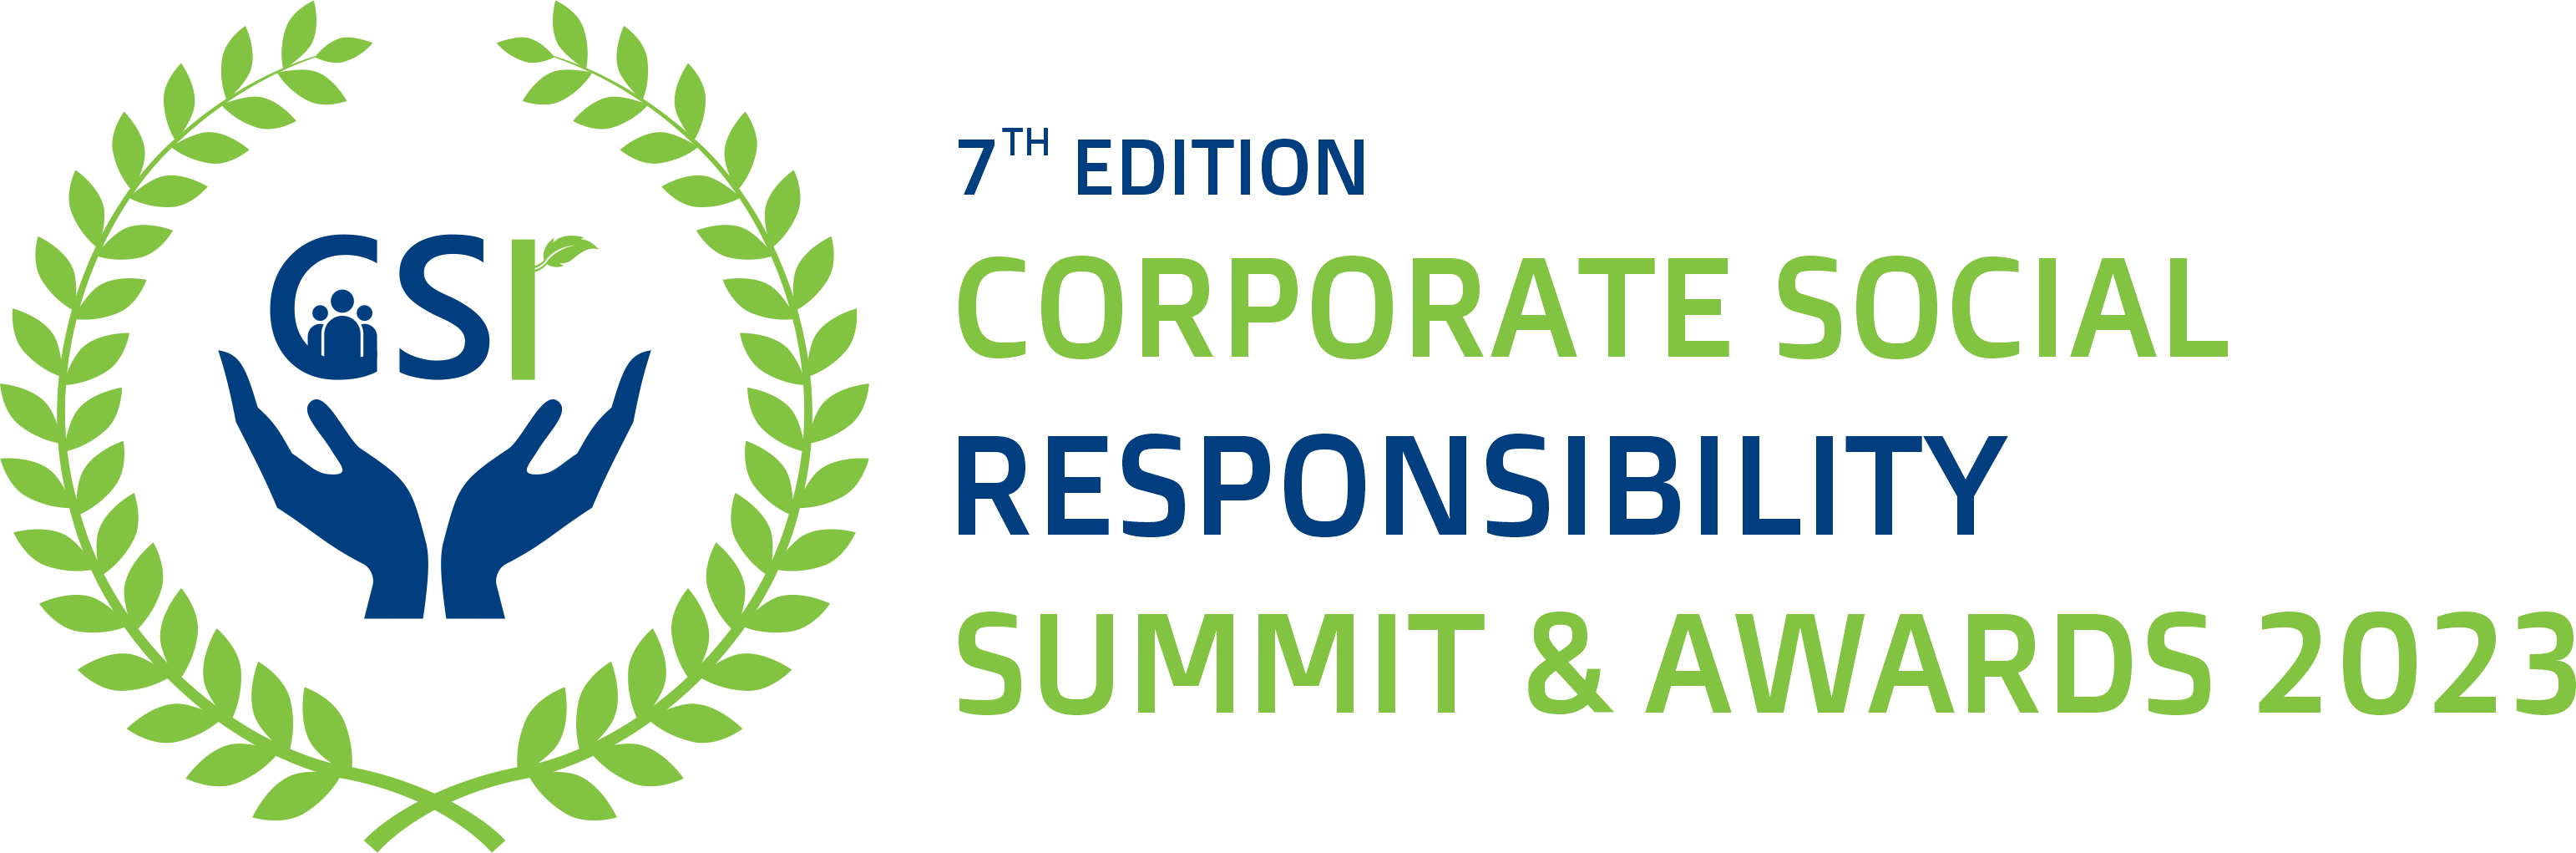 7th Edition Corporate Social Responsibility Summit and Awards 2023